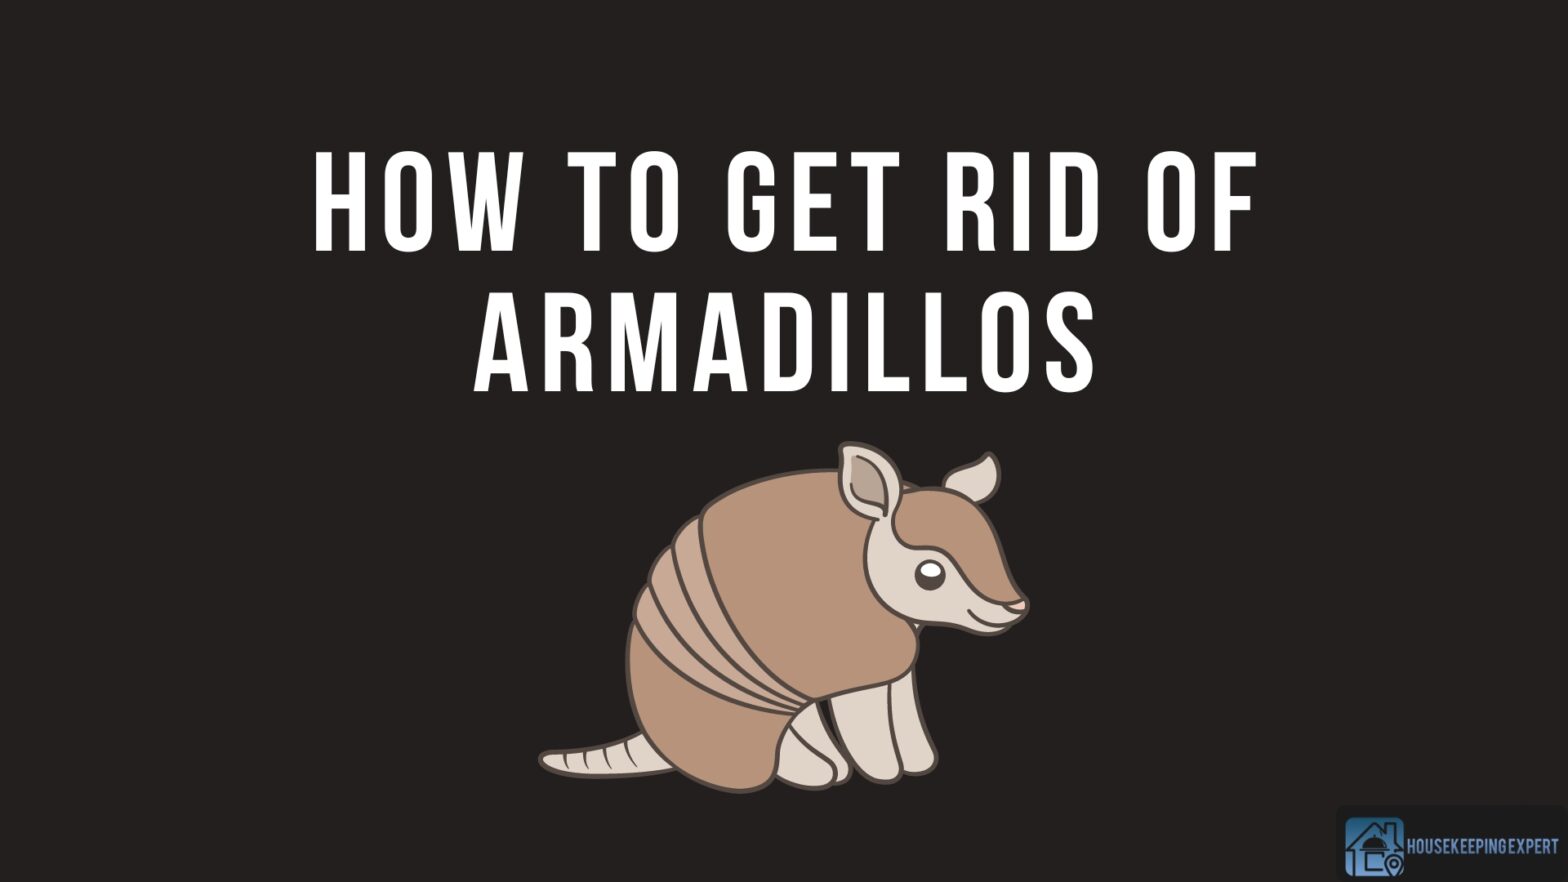 How To Get Rid Of Armadillos